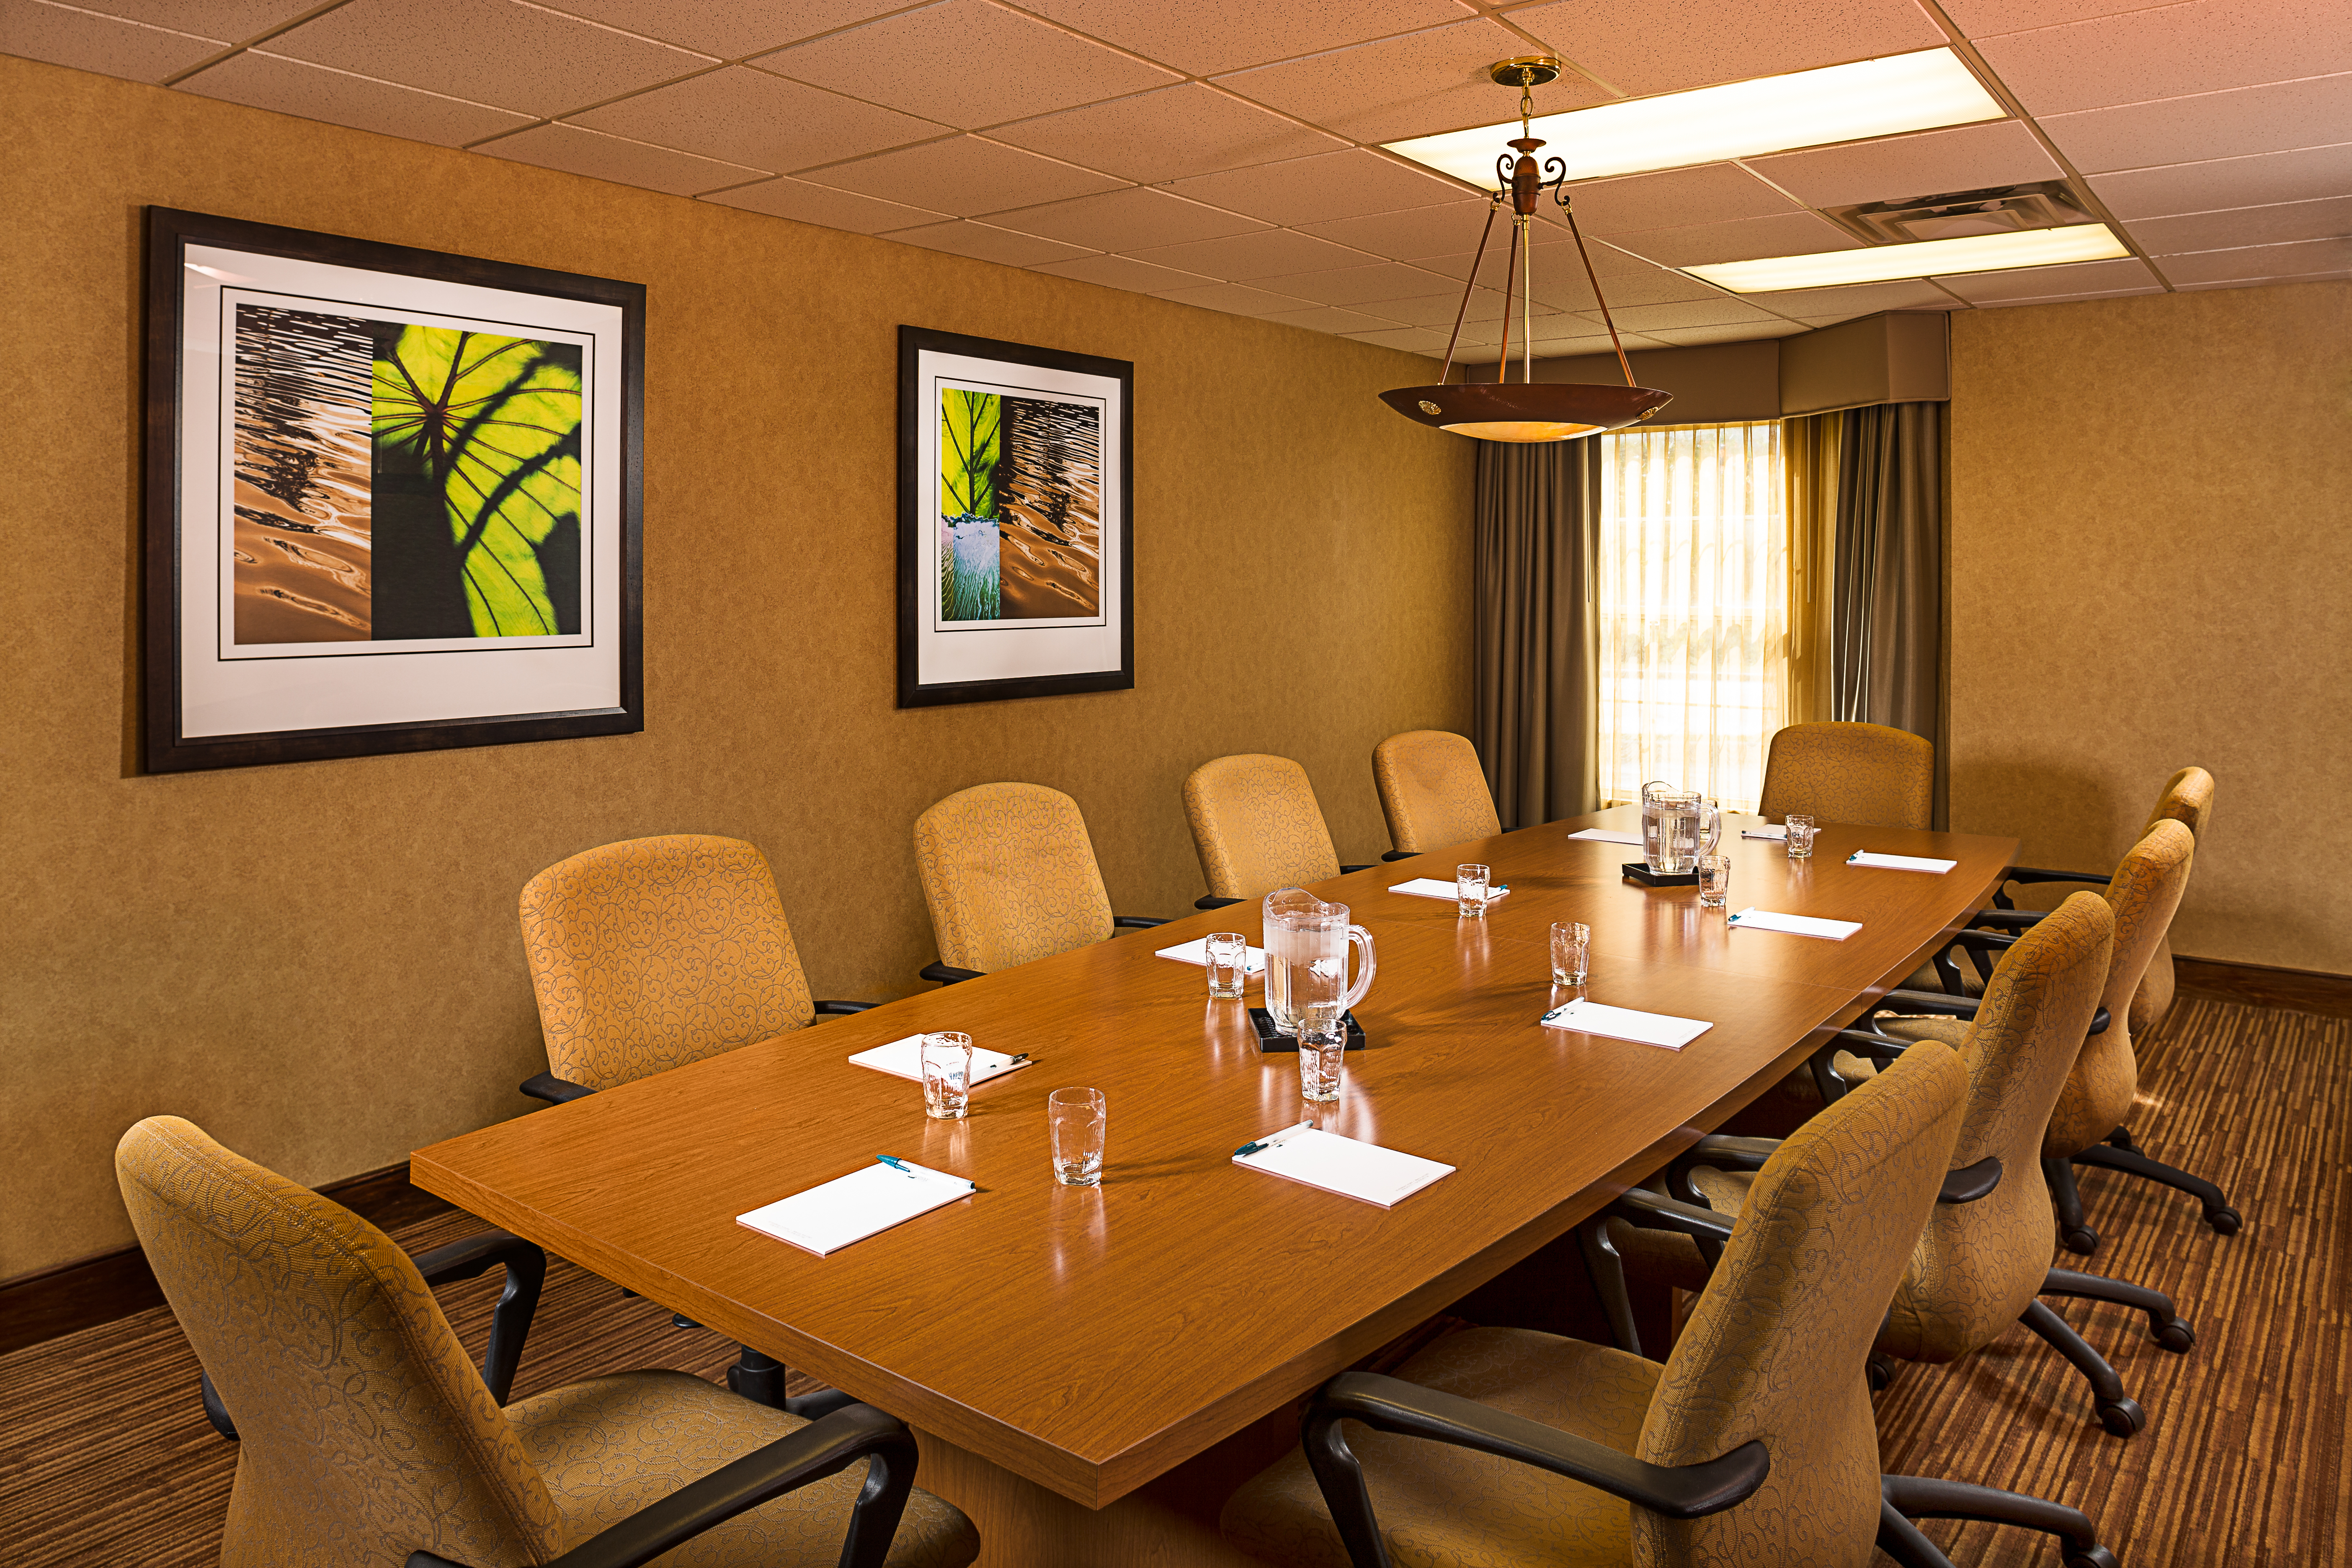 Meeting Space with boardroom table and chairs